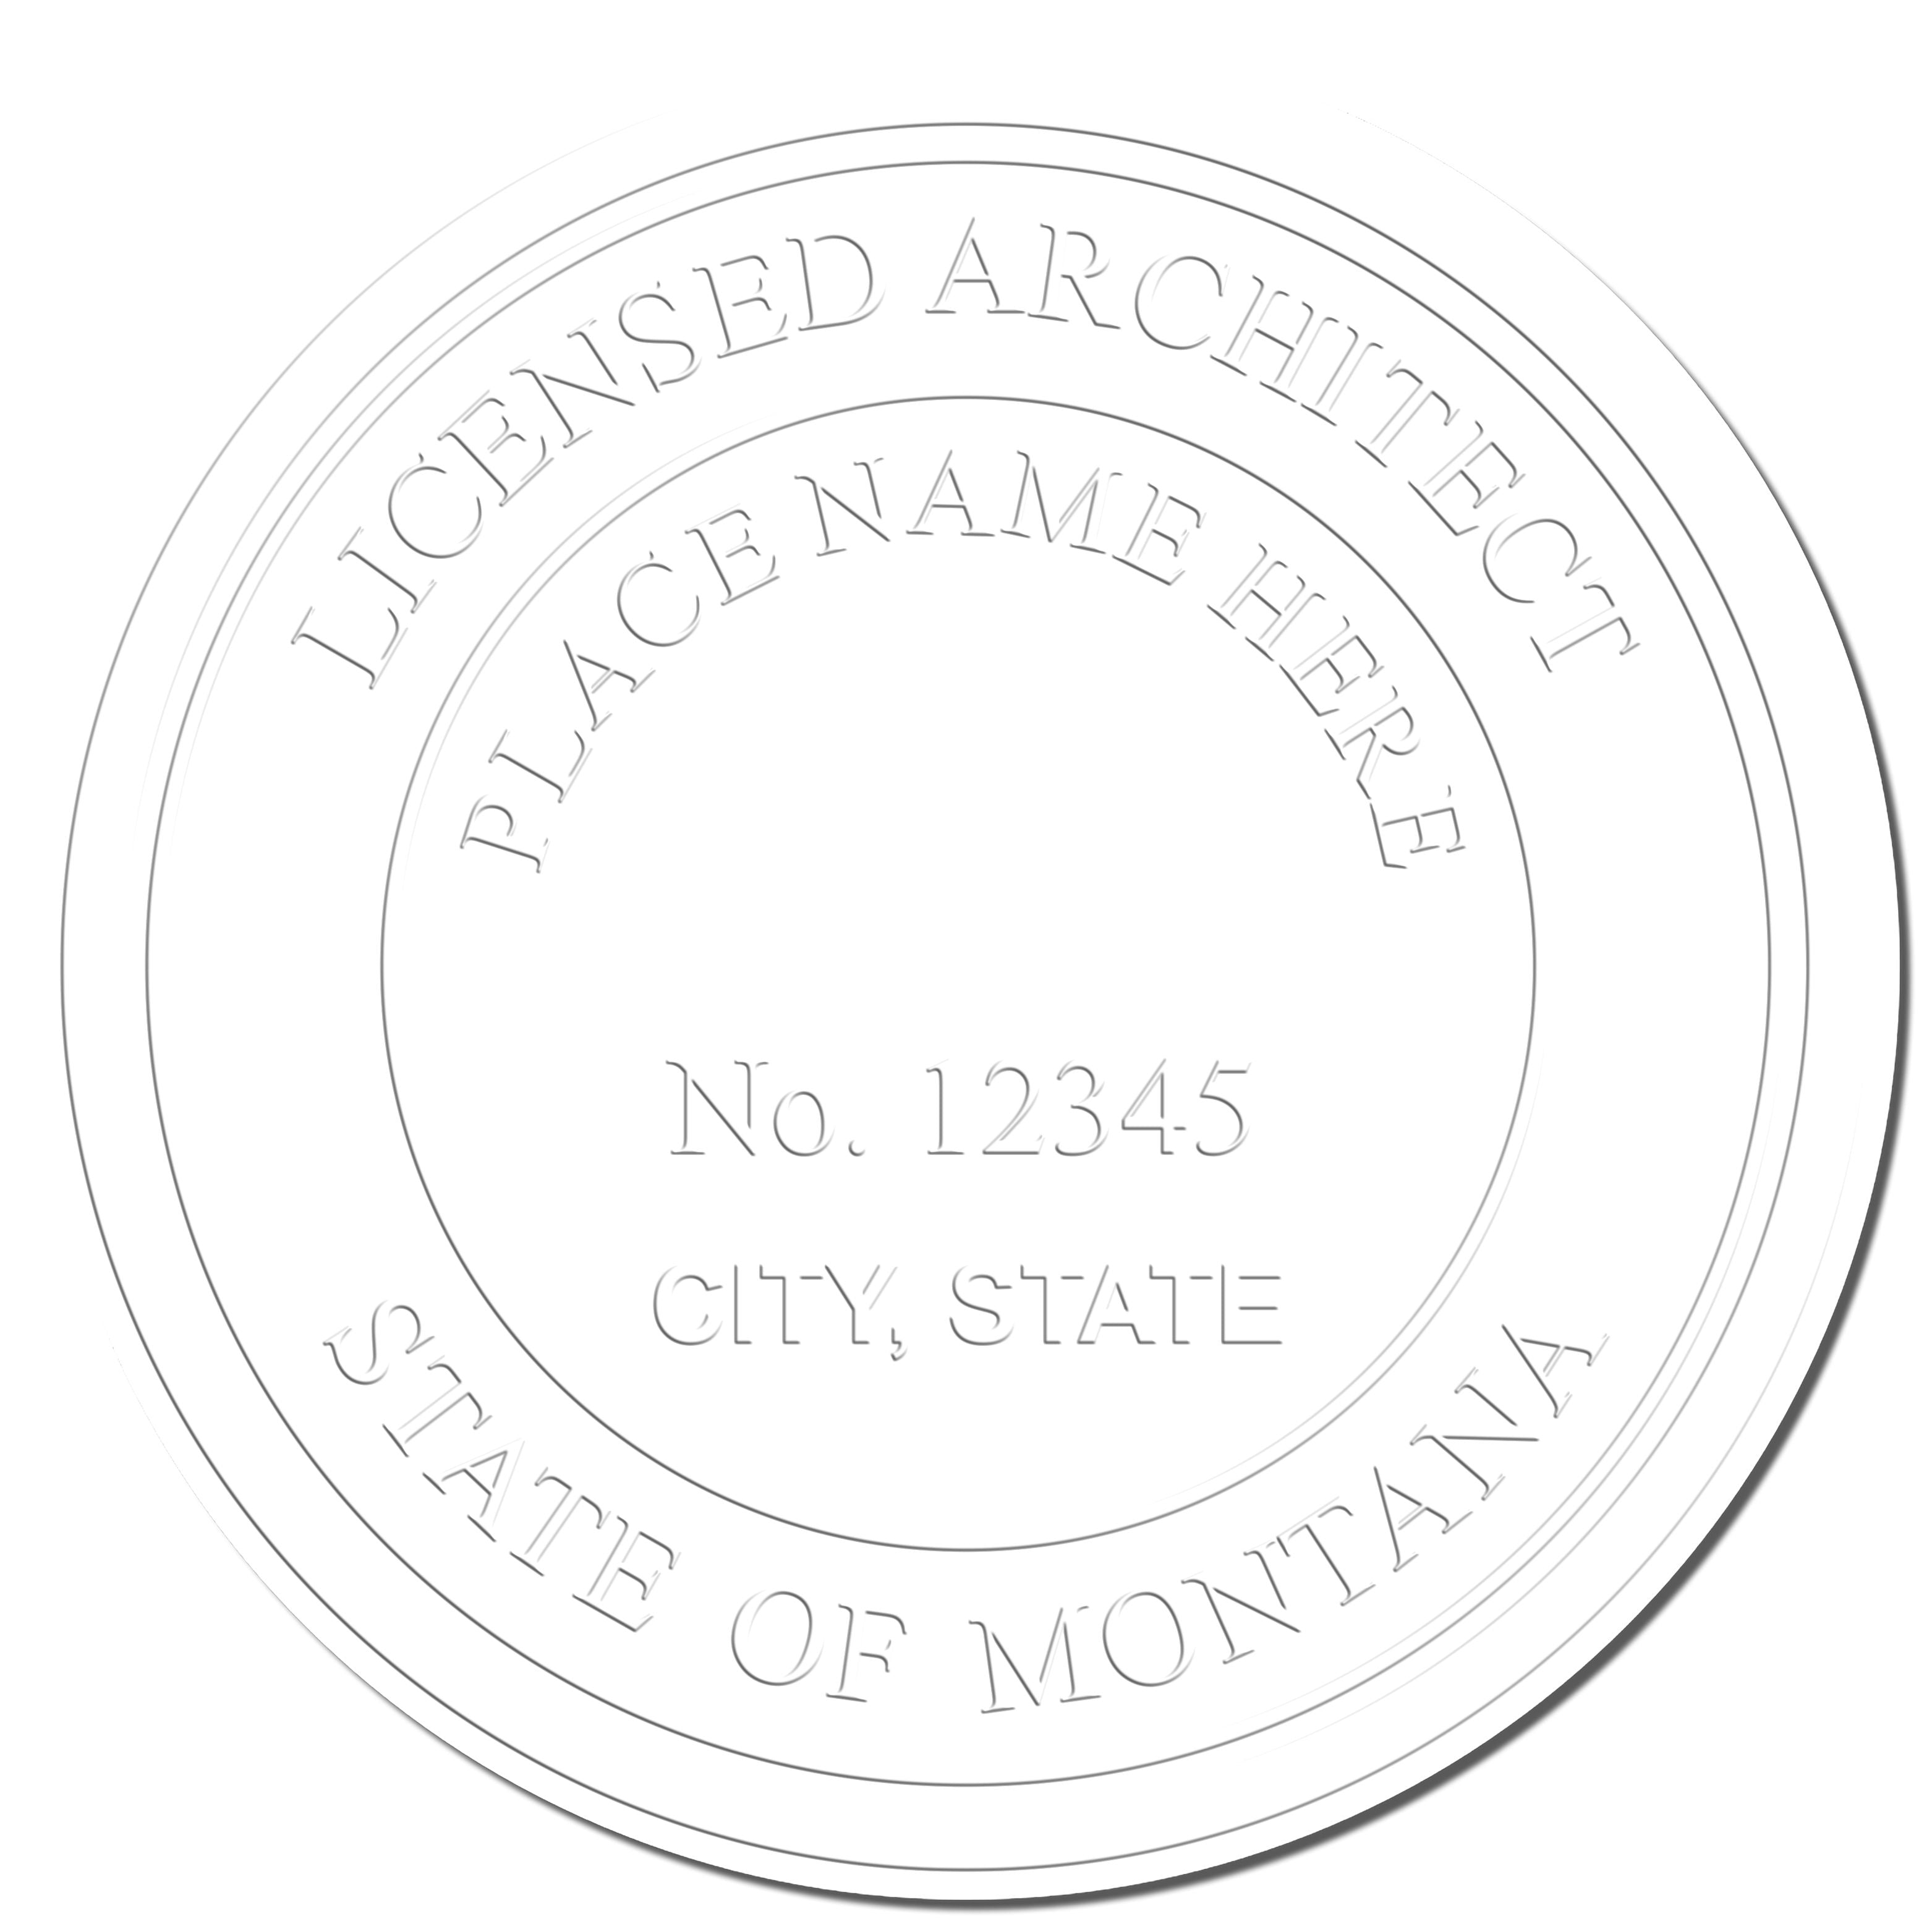 A stamped impression of the State of Montana Long Reach Architectural Embossing Seal in this stylish lifestyle photo, setting the tone for a unique and personalized product.